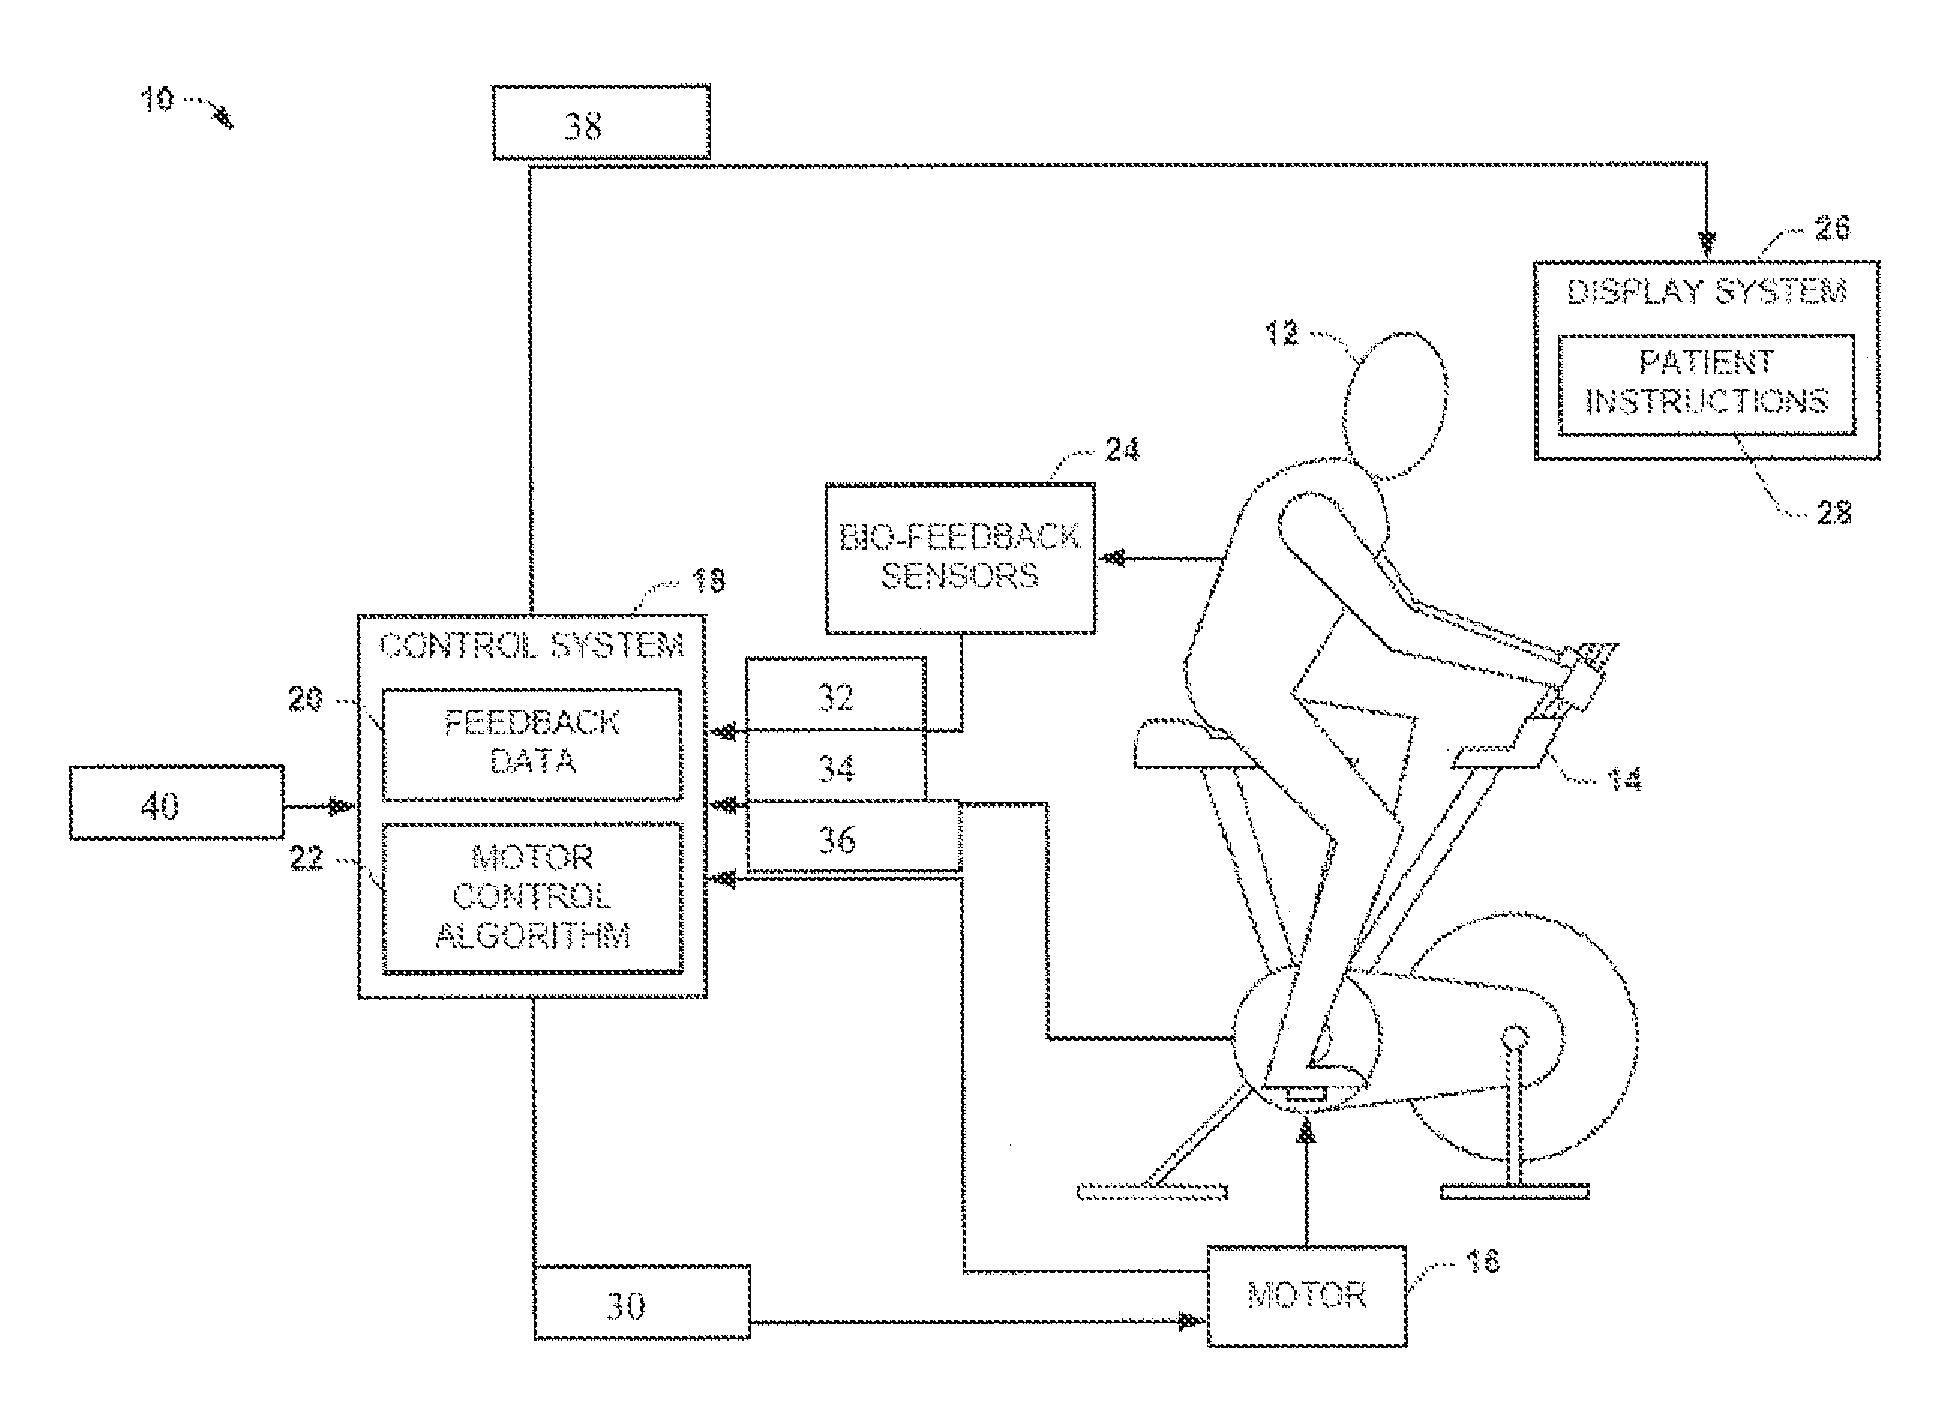 Systems and methods for improving motor function with assisted exercise